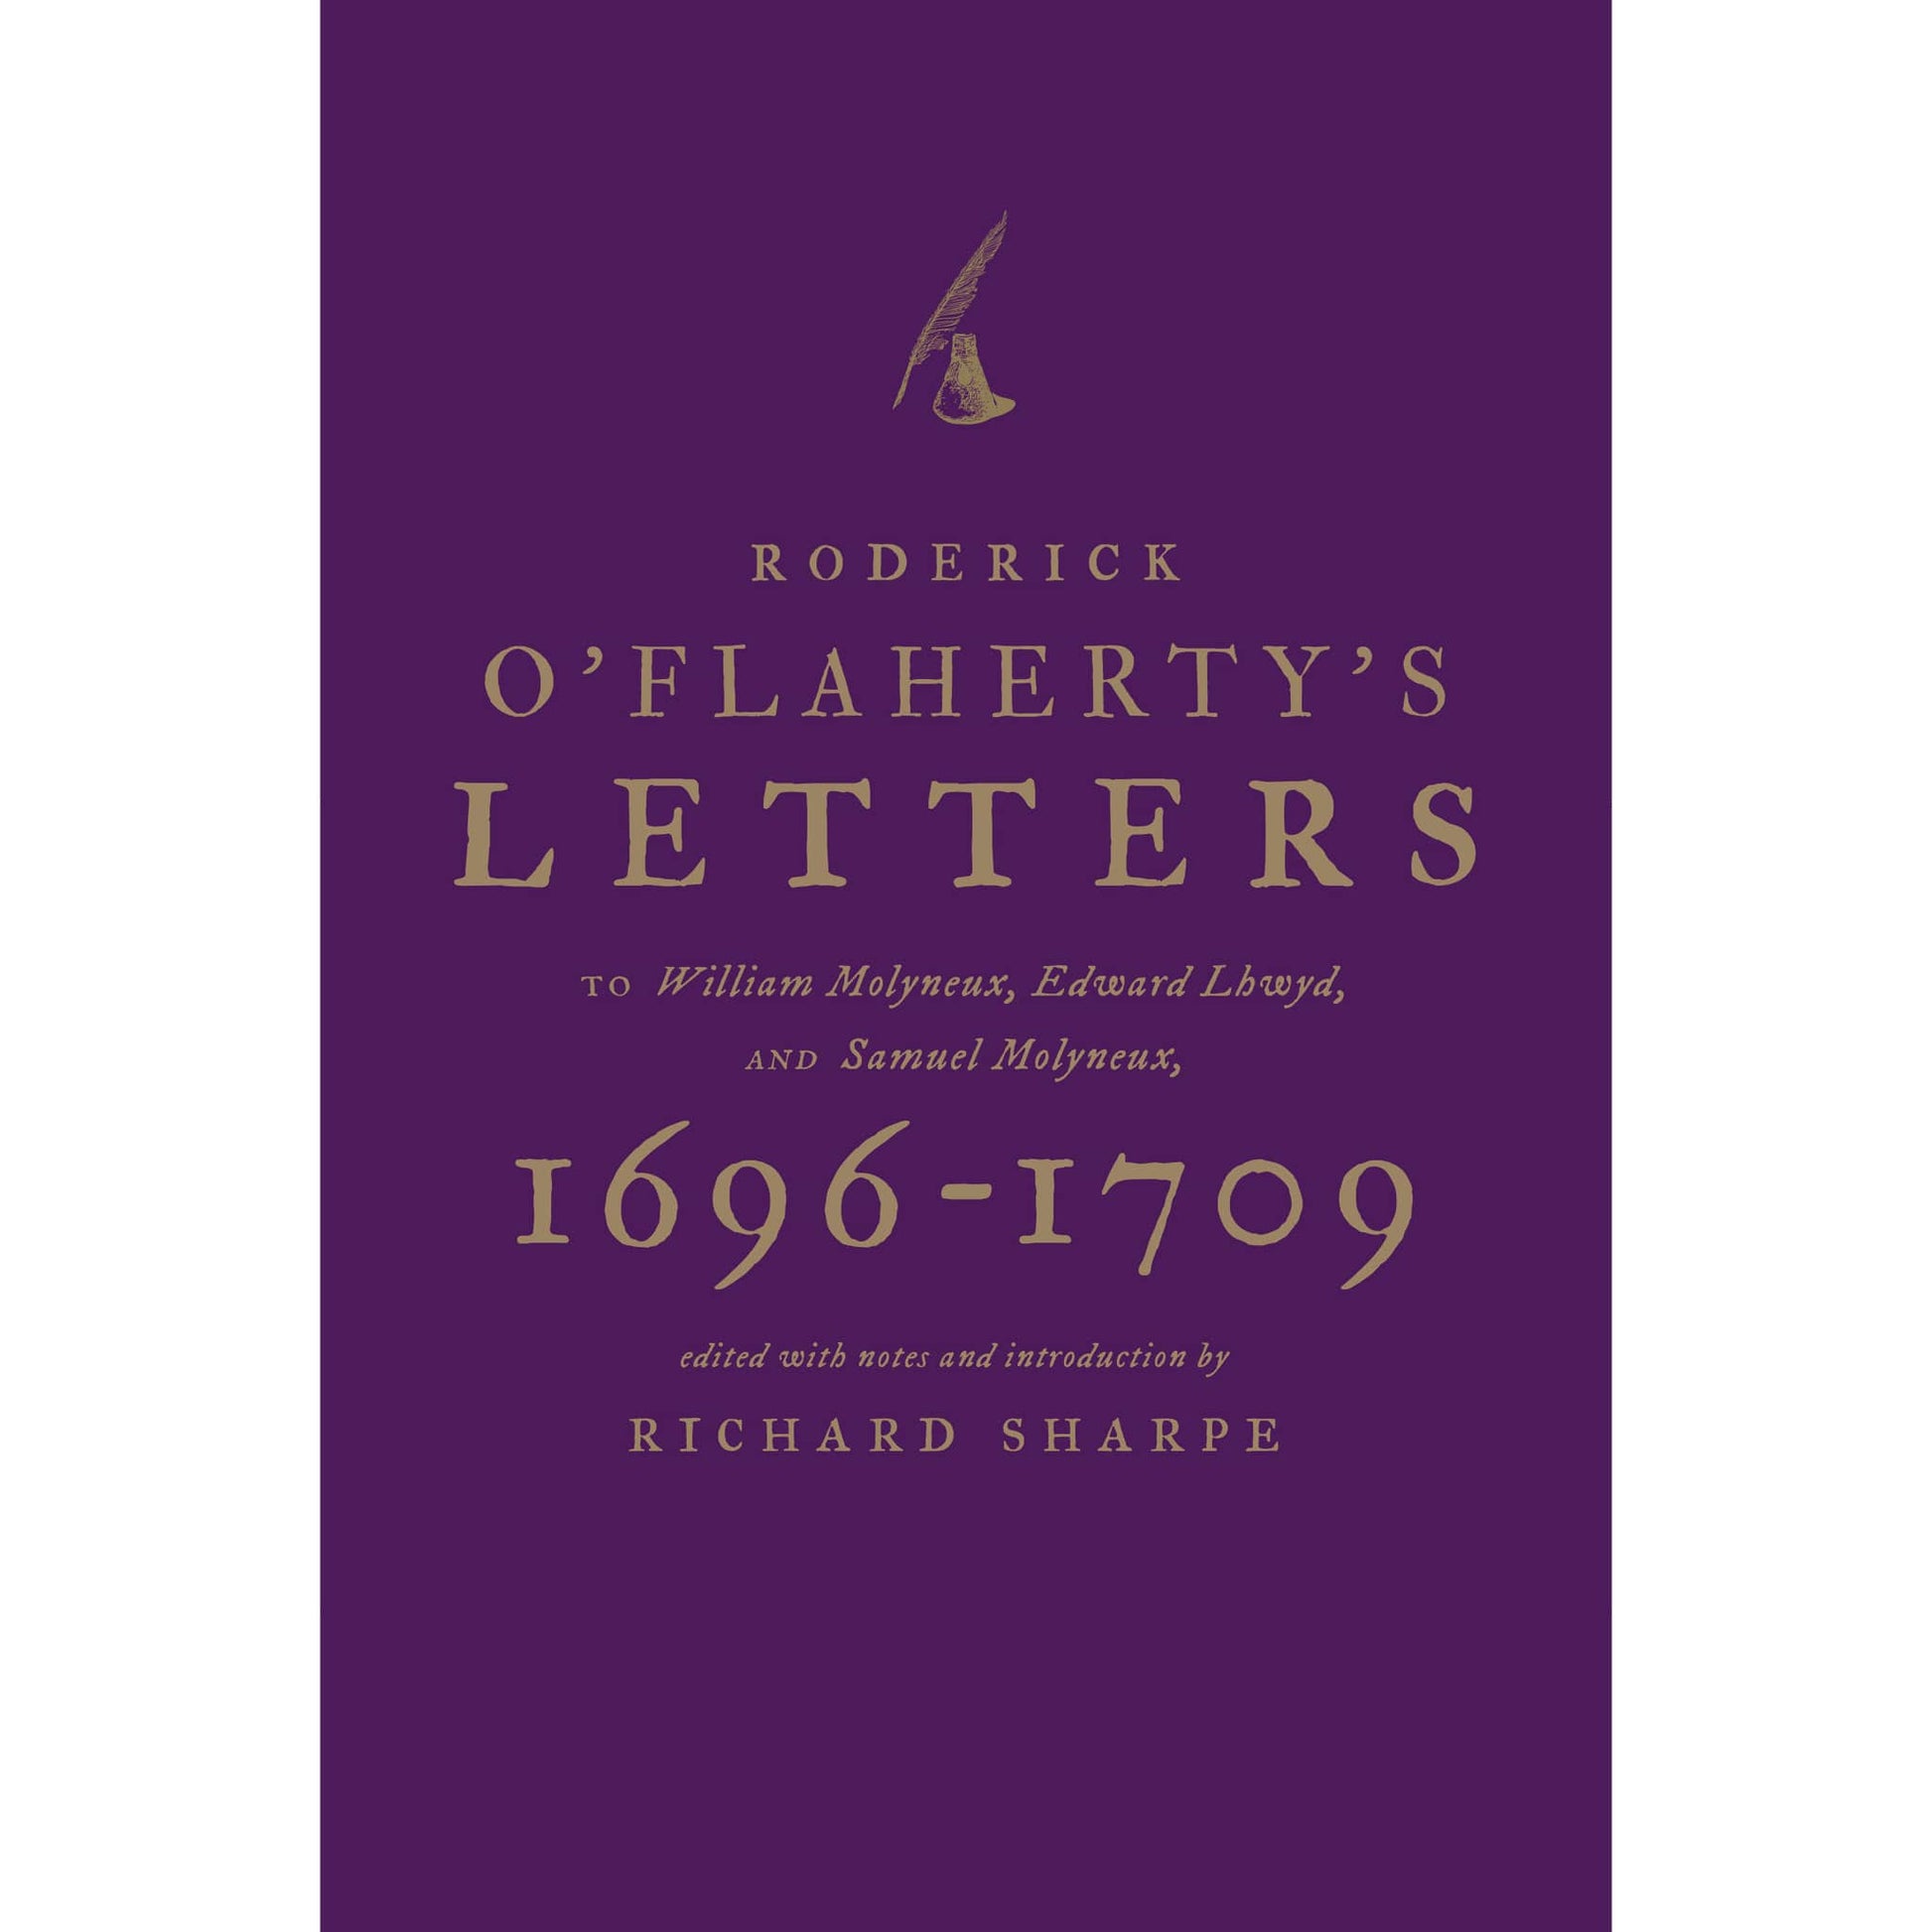 roderick oflahertys letters cover